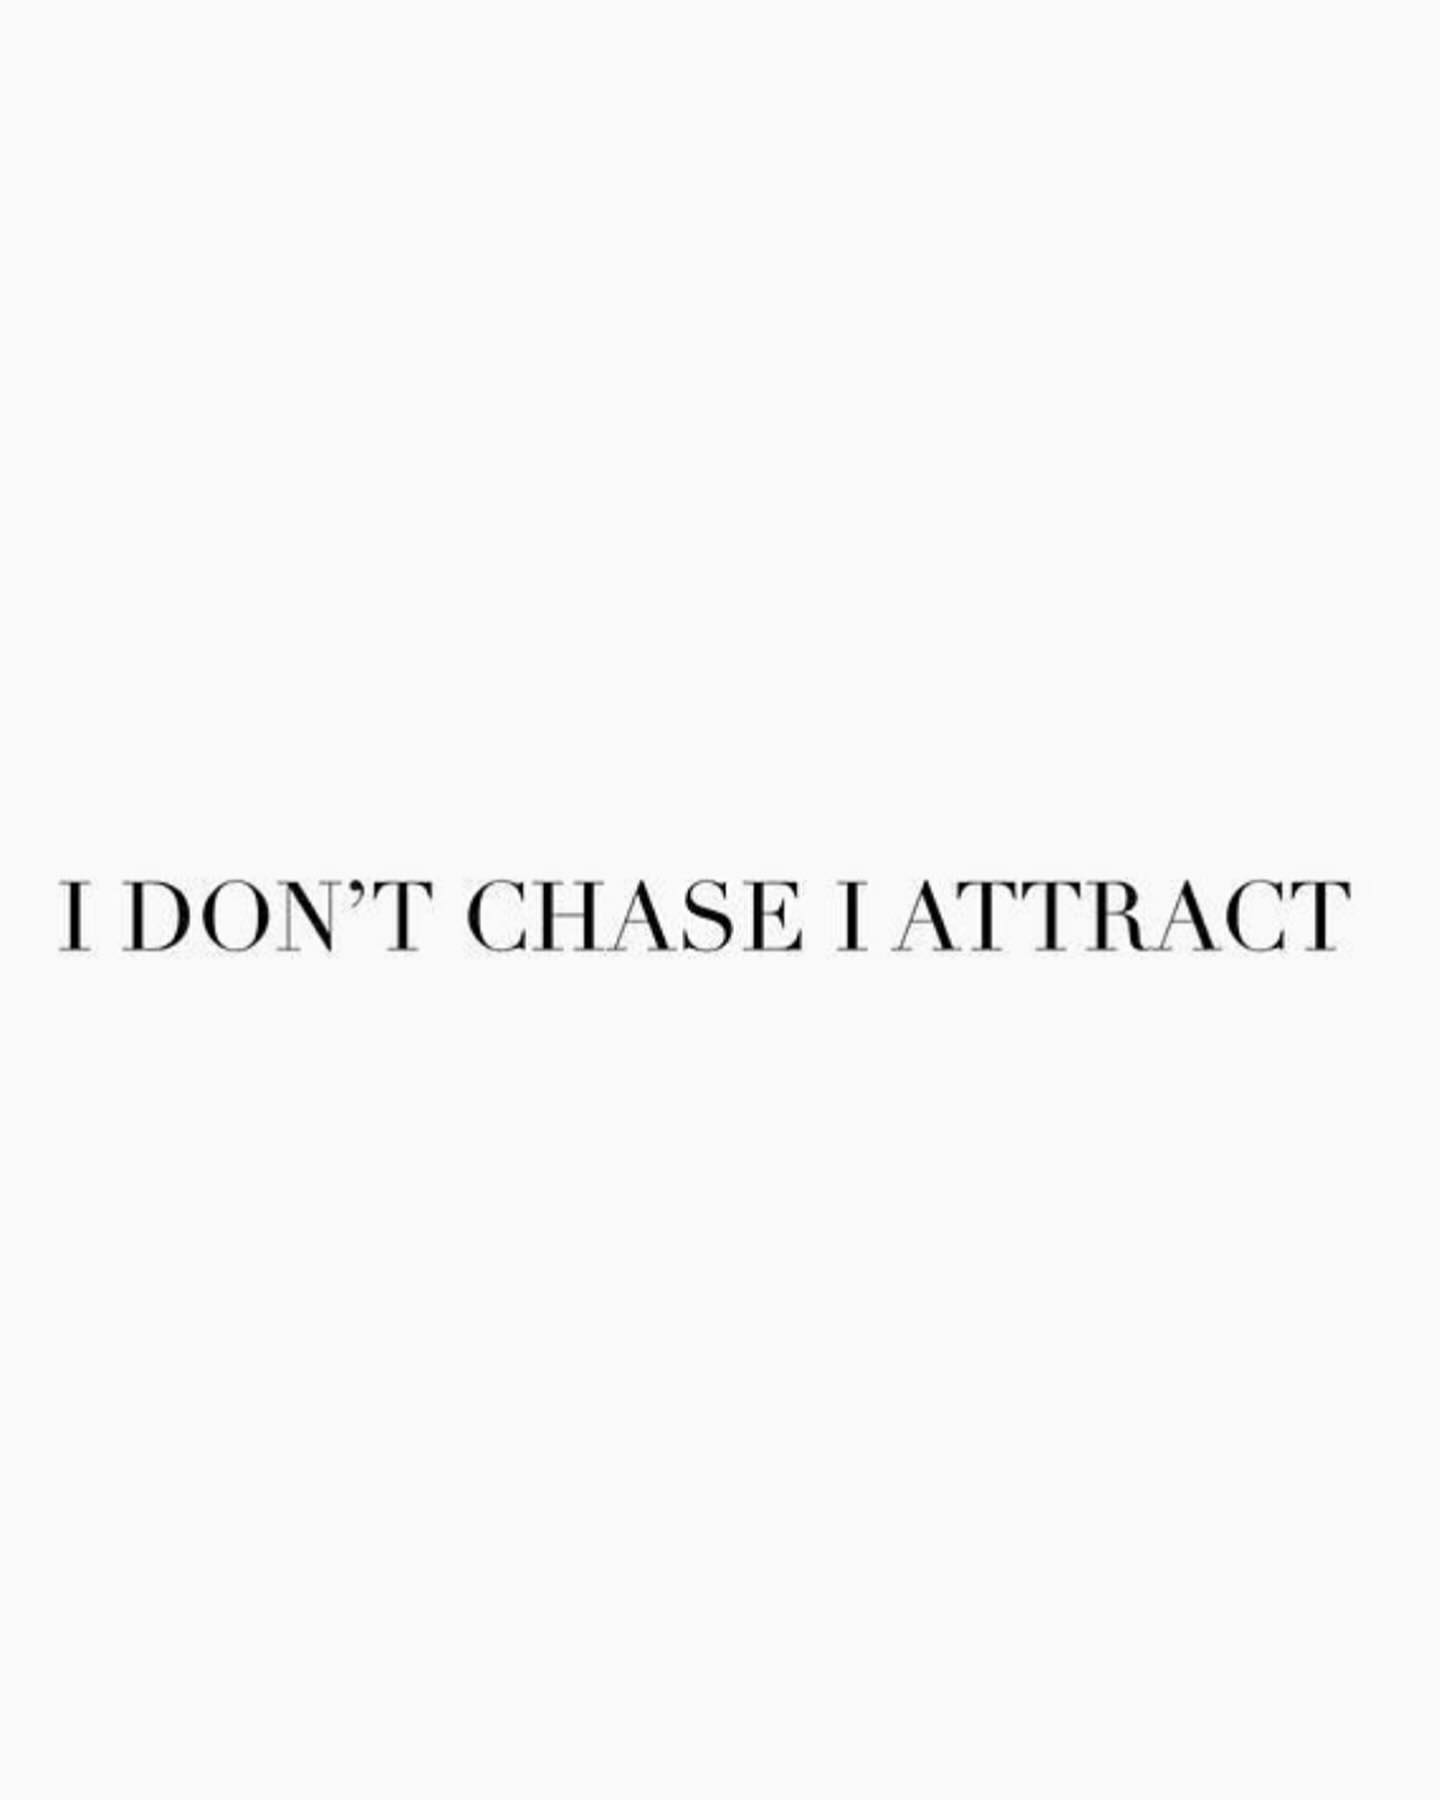 I don’t chase. I attract.